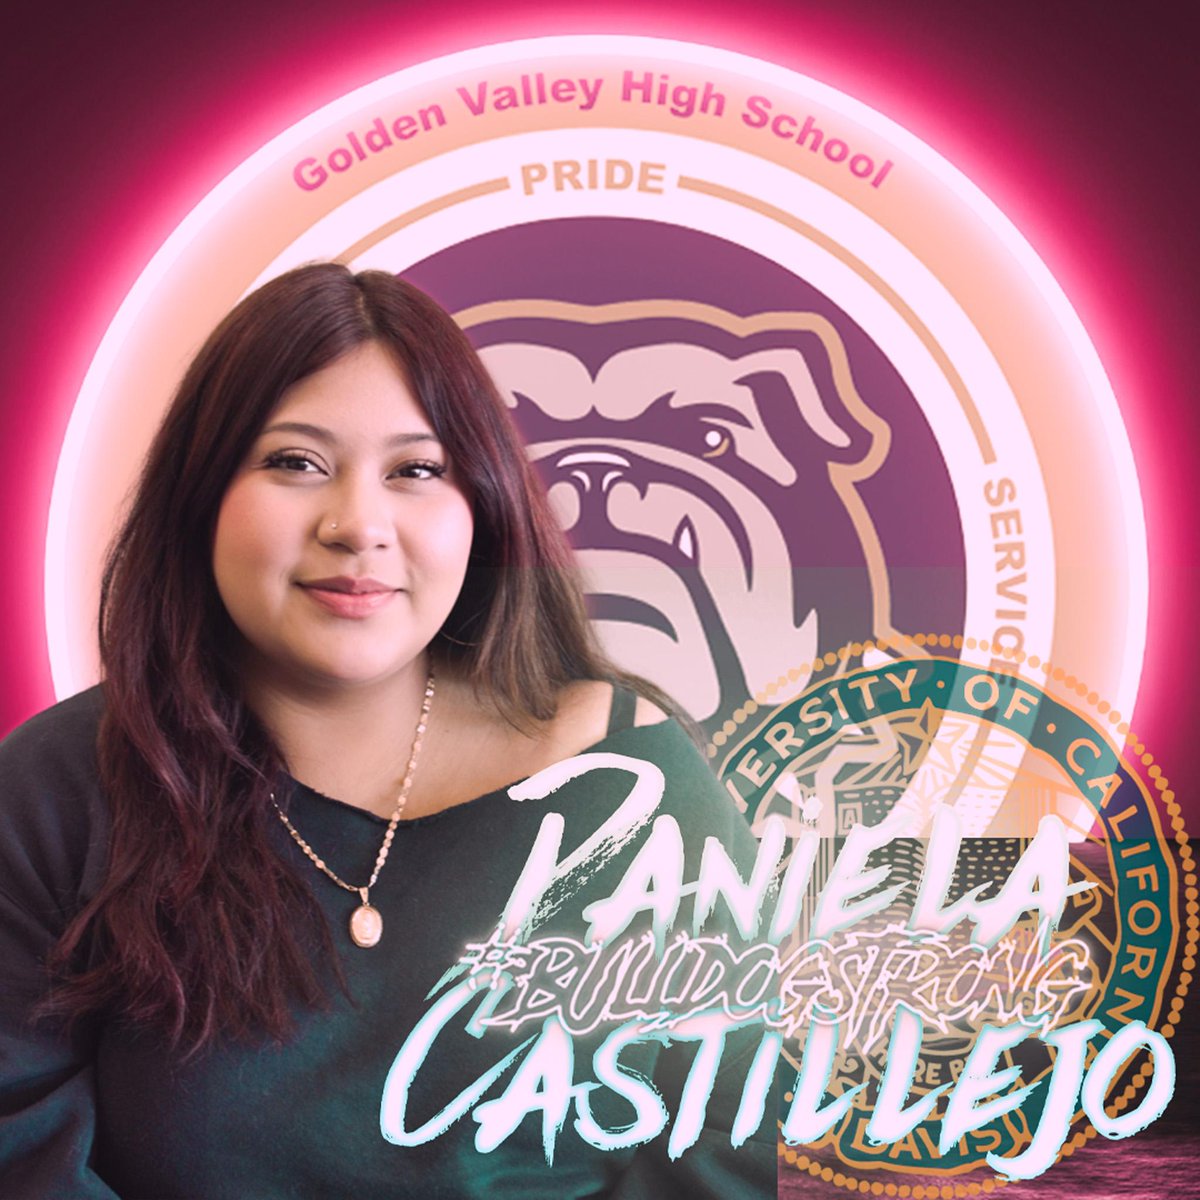 For her GROWTH and SERVICE as a leader of the Tennis Team, Daniela is #BulldogSTRONG. edl.io/n1919358